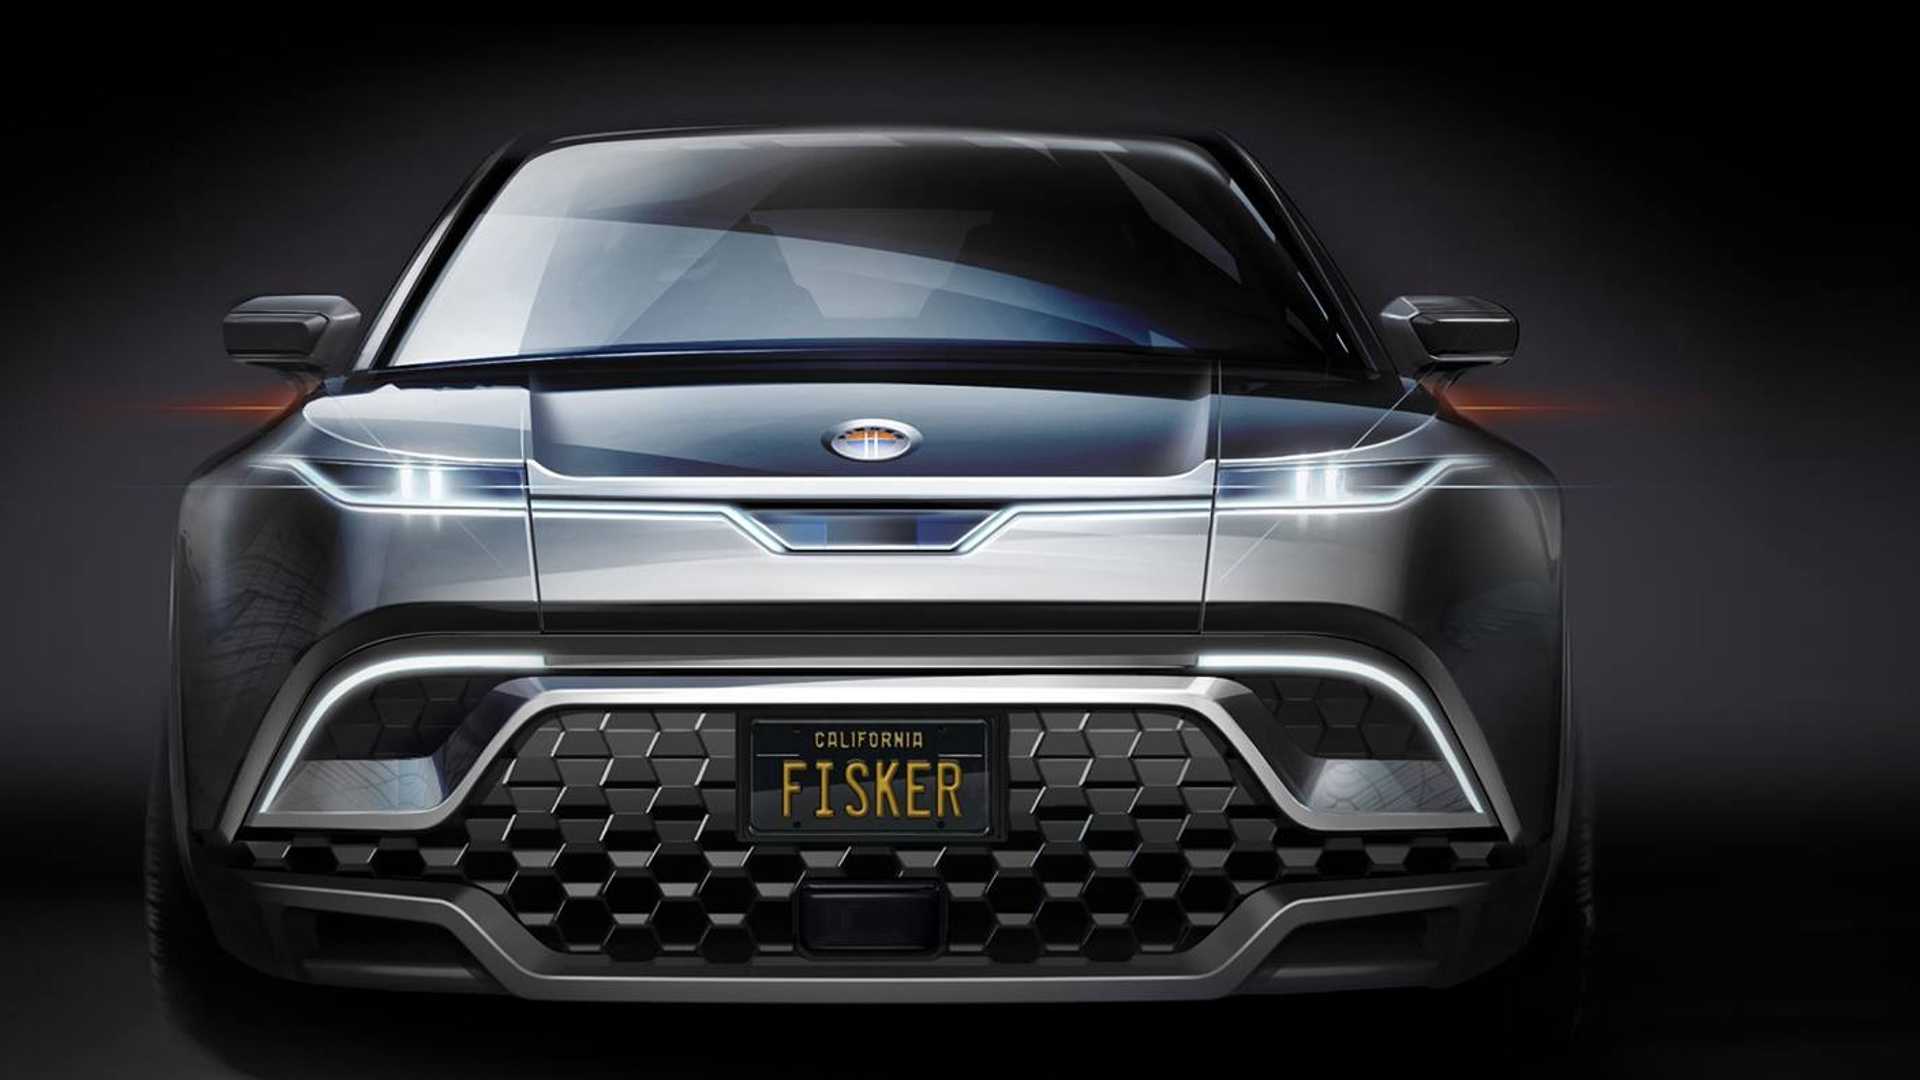 New Macan Ev Fisker Suv Ocean Electric 2022 Most Dubbed Sustainable